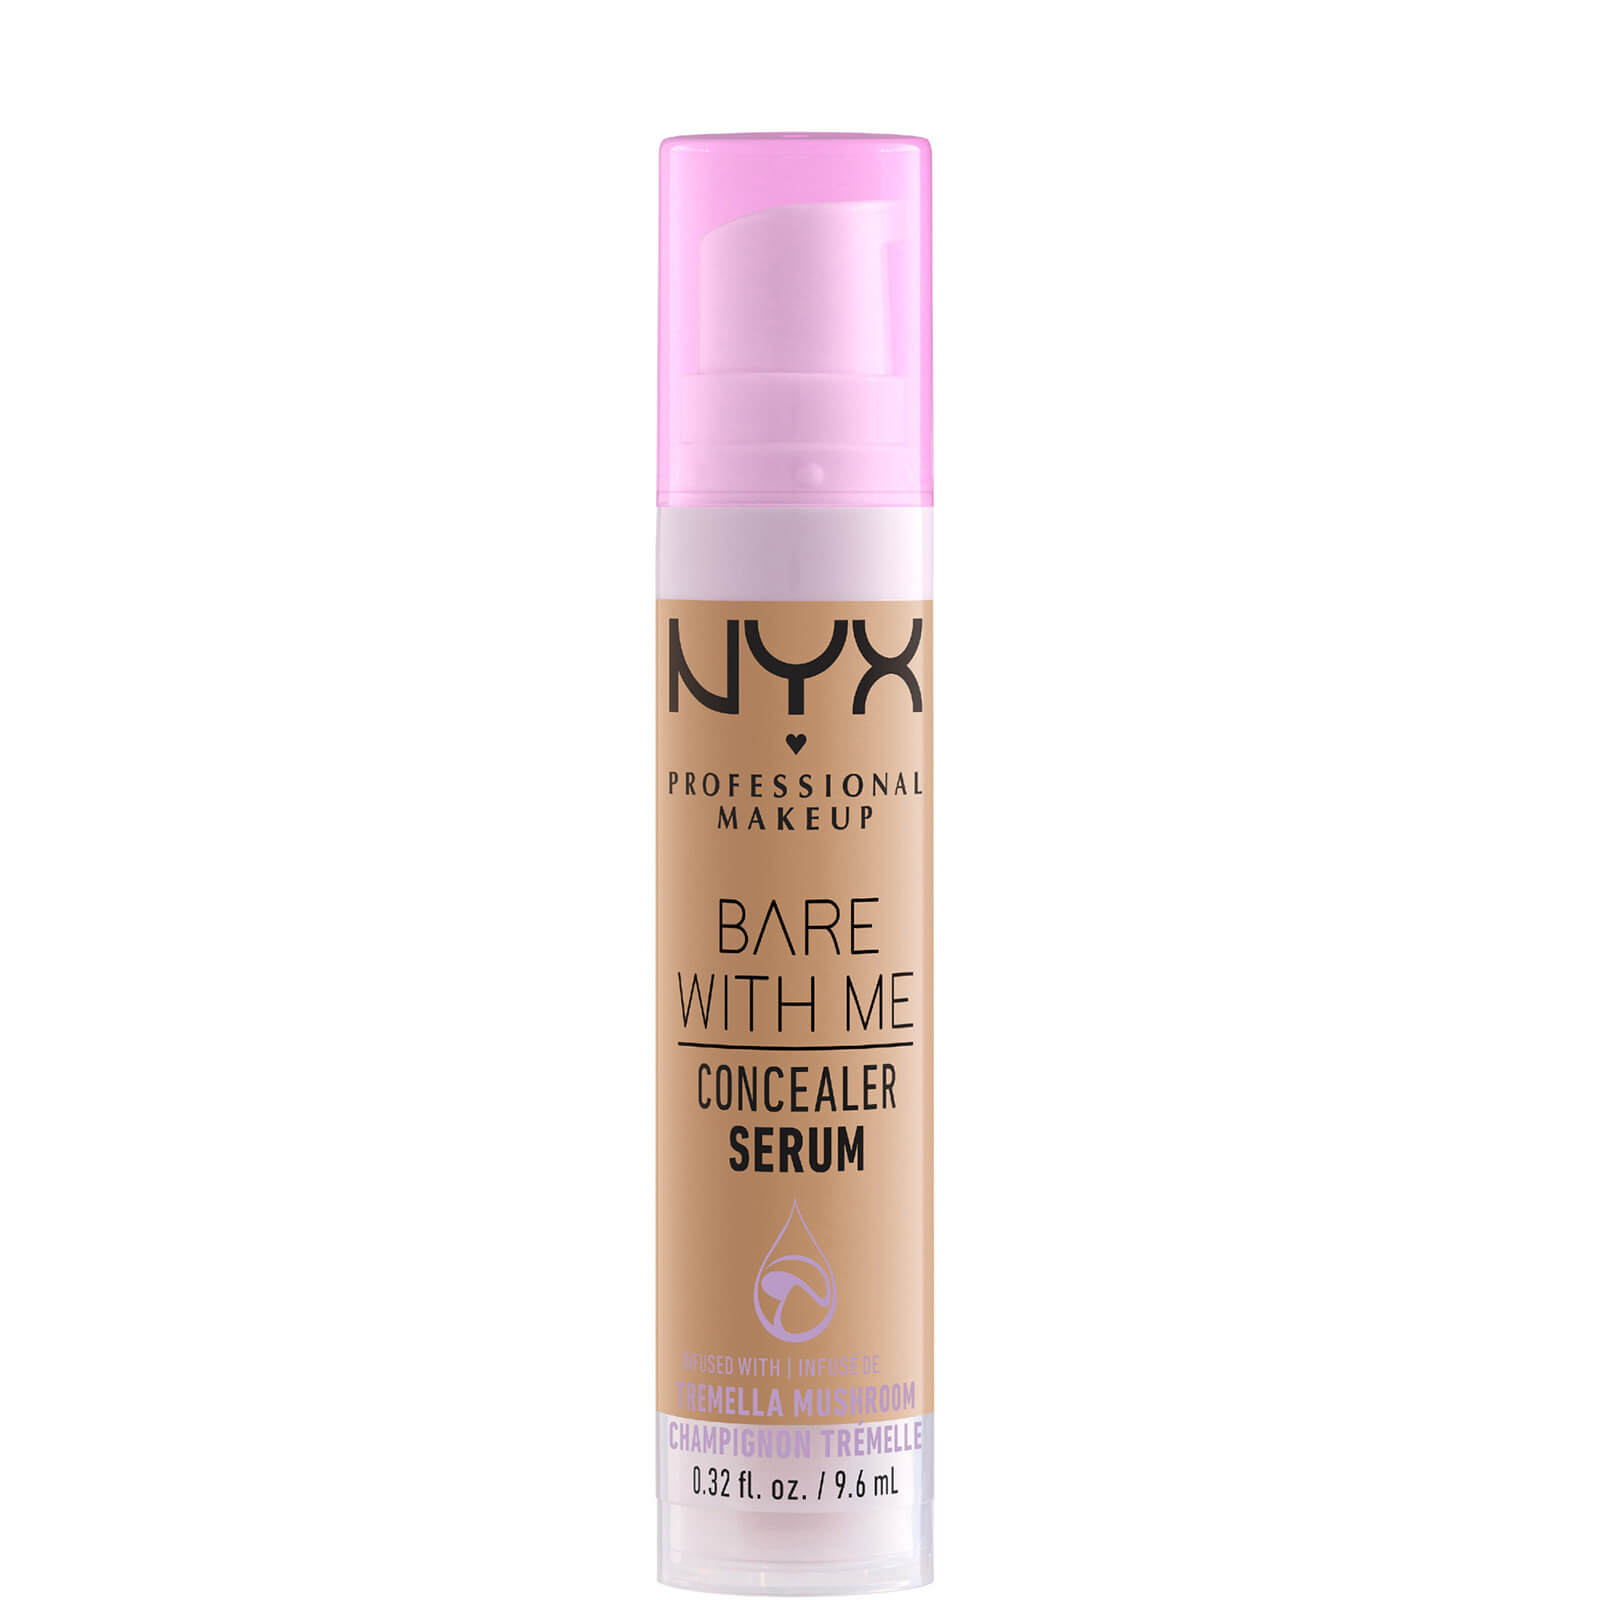 Image of NYX Professional Makeup Bare With Me Concealer Serum 9.6ml (Various Shades) - Medium